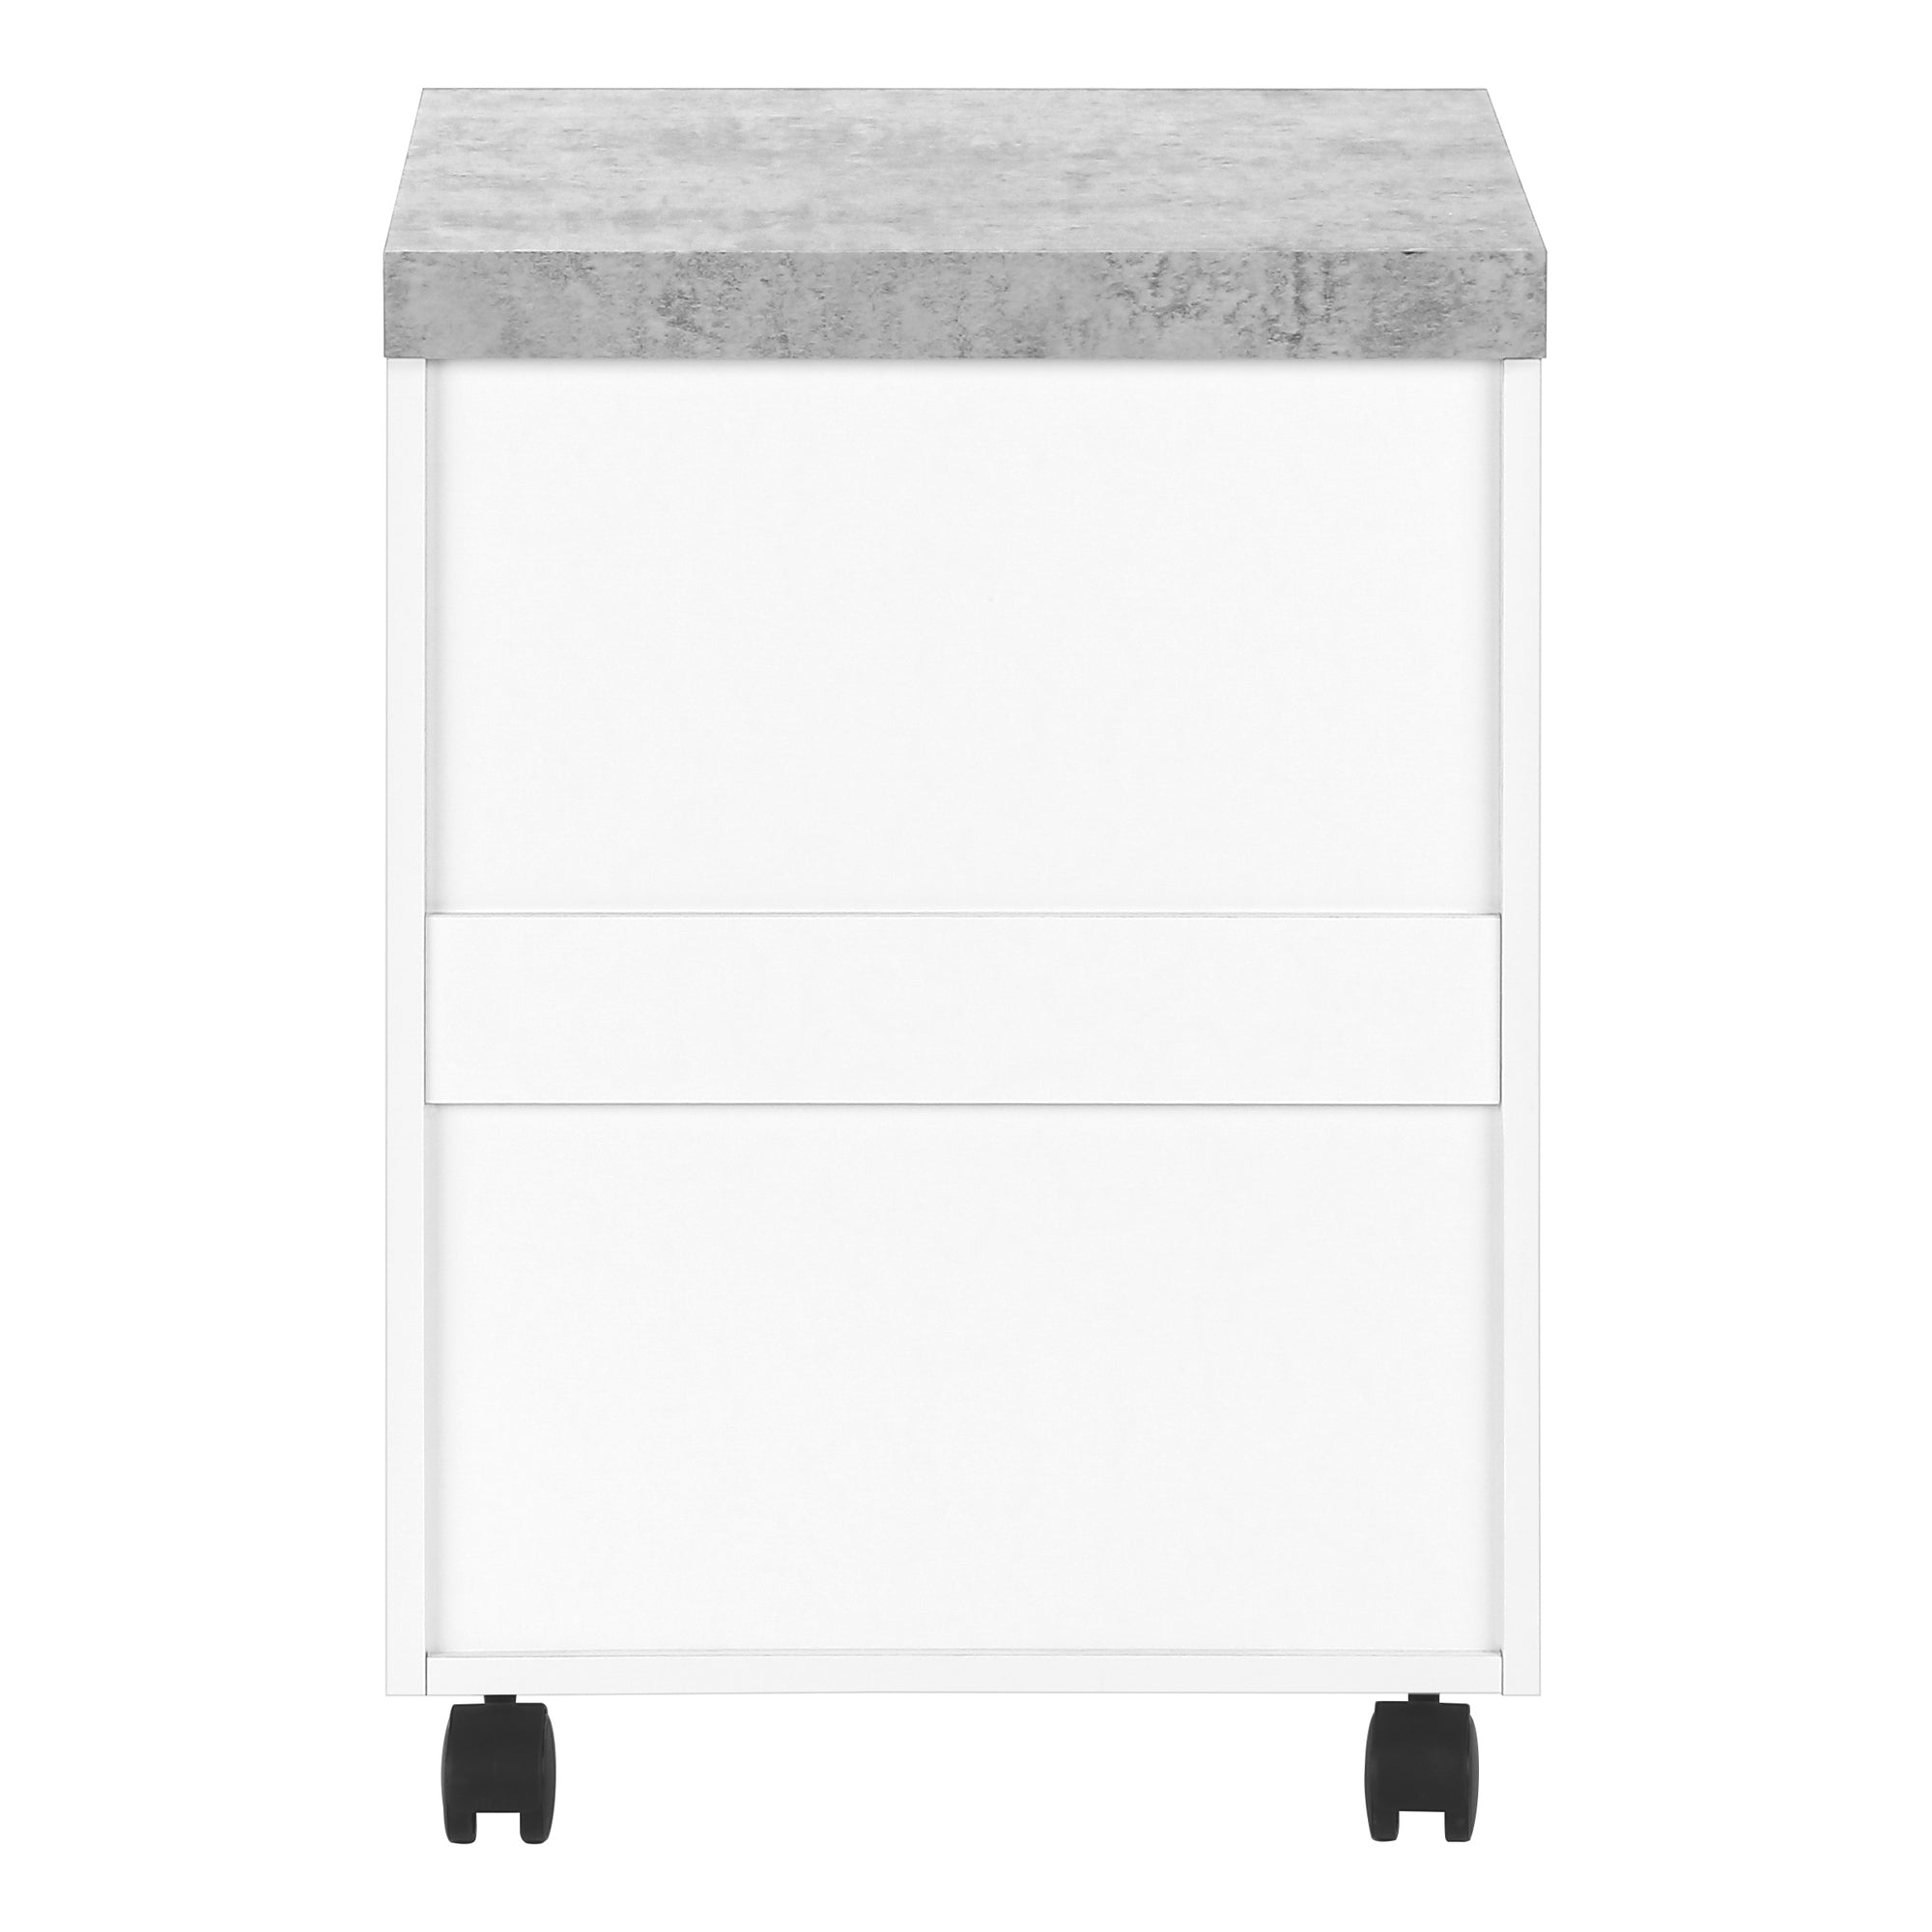 MN-847051    File Cabinet, Rolling Mobile, Storage, Printer Stand, Wood File Cabinet, Office, Mdf, Grey Cement Look, Contemporary, Modern